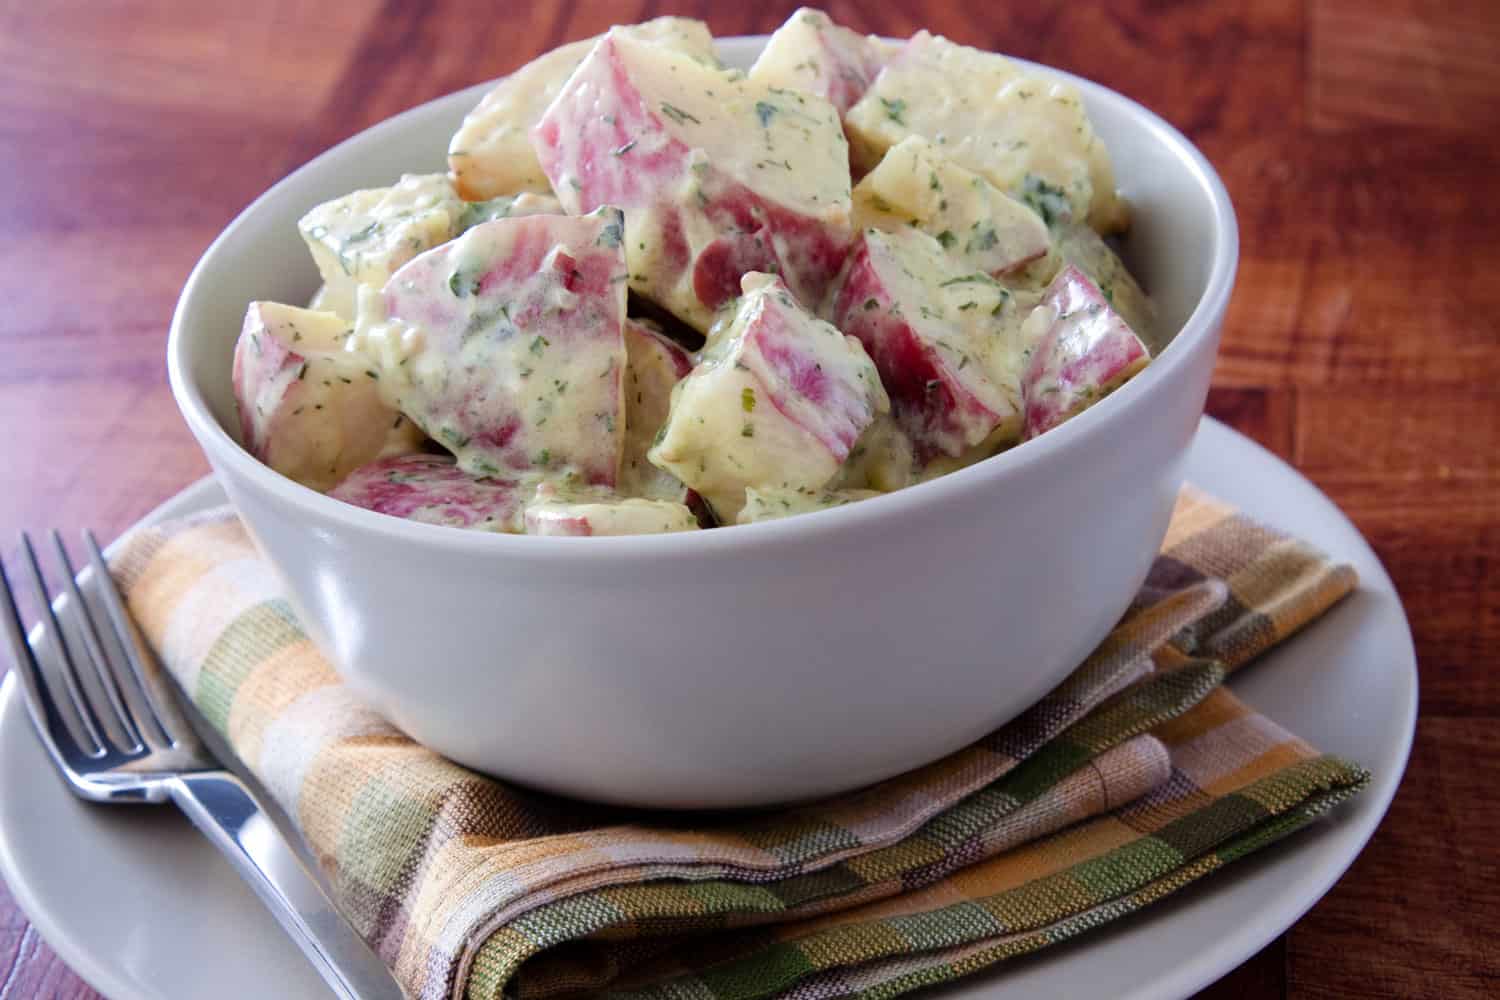 A delicious dish of evenly sliced salad potatoes